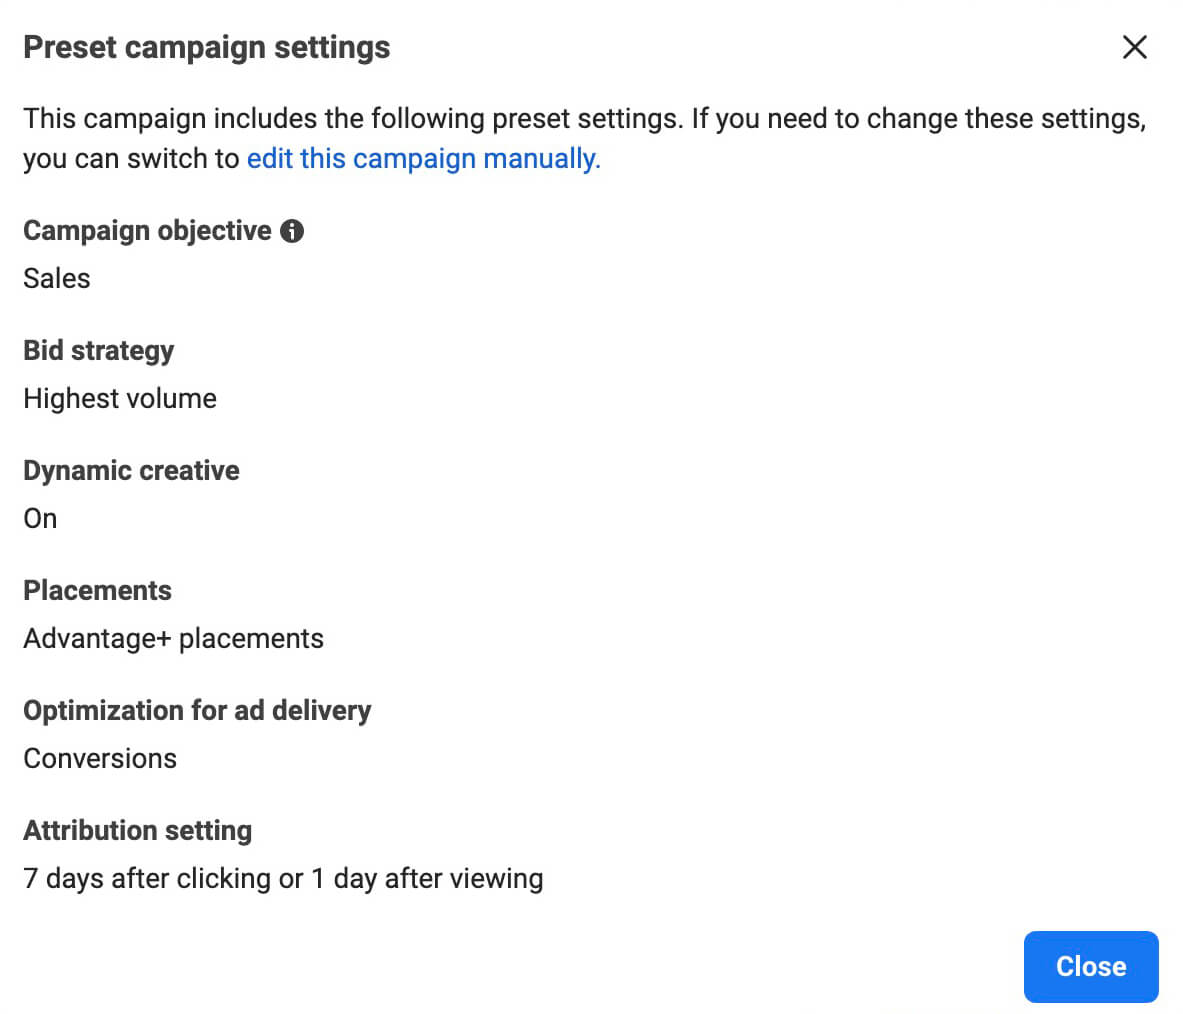 how-to-run-tailored-sales-campaigns-for-facebook-ads-best-practices-highest-bid-strategy-advantage-plus-placements-optimizing-for-conversions-dynamic-creative-preset-settings-example-5